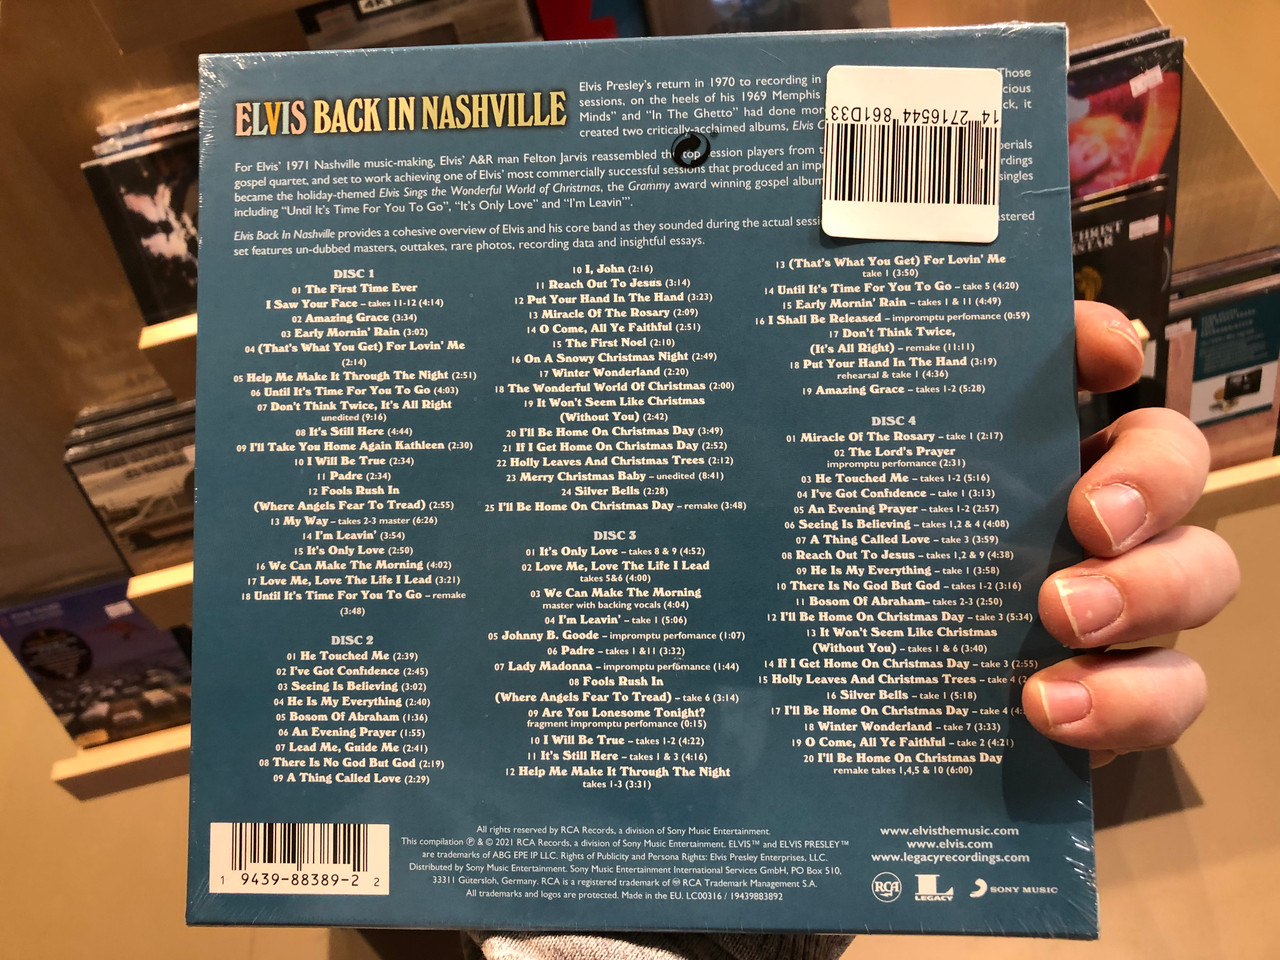 https://cdn10.bigcommerce.com/s-62bdpkt7pb/products/0/images/219931/Elvis_Back_In_Nashville_50th_anniversary_celebration_of_the_1971_nashville_sessions_Deluxe_82_song_4-CD_includes_Newly_Mixed_Audio_By_Matt_Ross-Spang_Features_Outtakes_and_Undubbed_Re__01212.1648704115.1280.1280.JPG?c=2&_gl=1*9ahbex*_ga*MjA2NTIxMjE2MC4xNTkwNTEyNTMy*_ga_WS2VZYPC6G*MTY0ODcwMjQ5OS4zMzguMS4xNjQ4NzAzNzYzLjM4